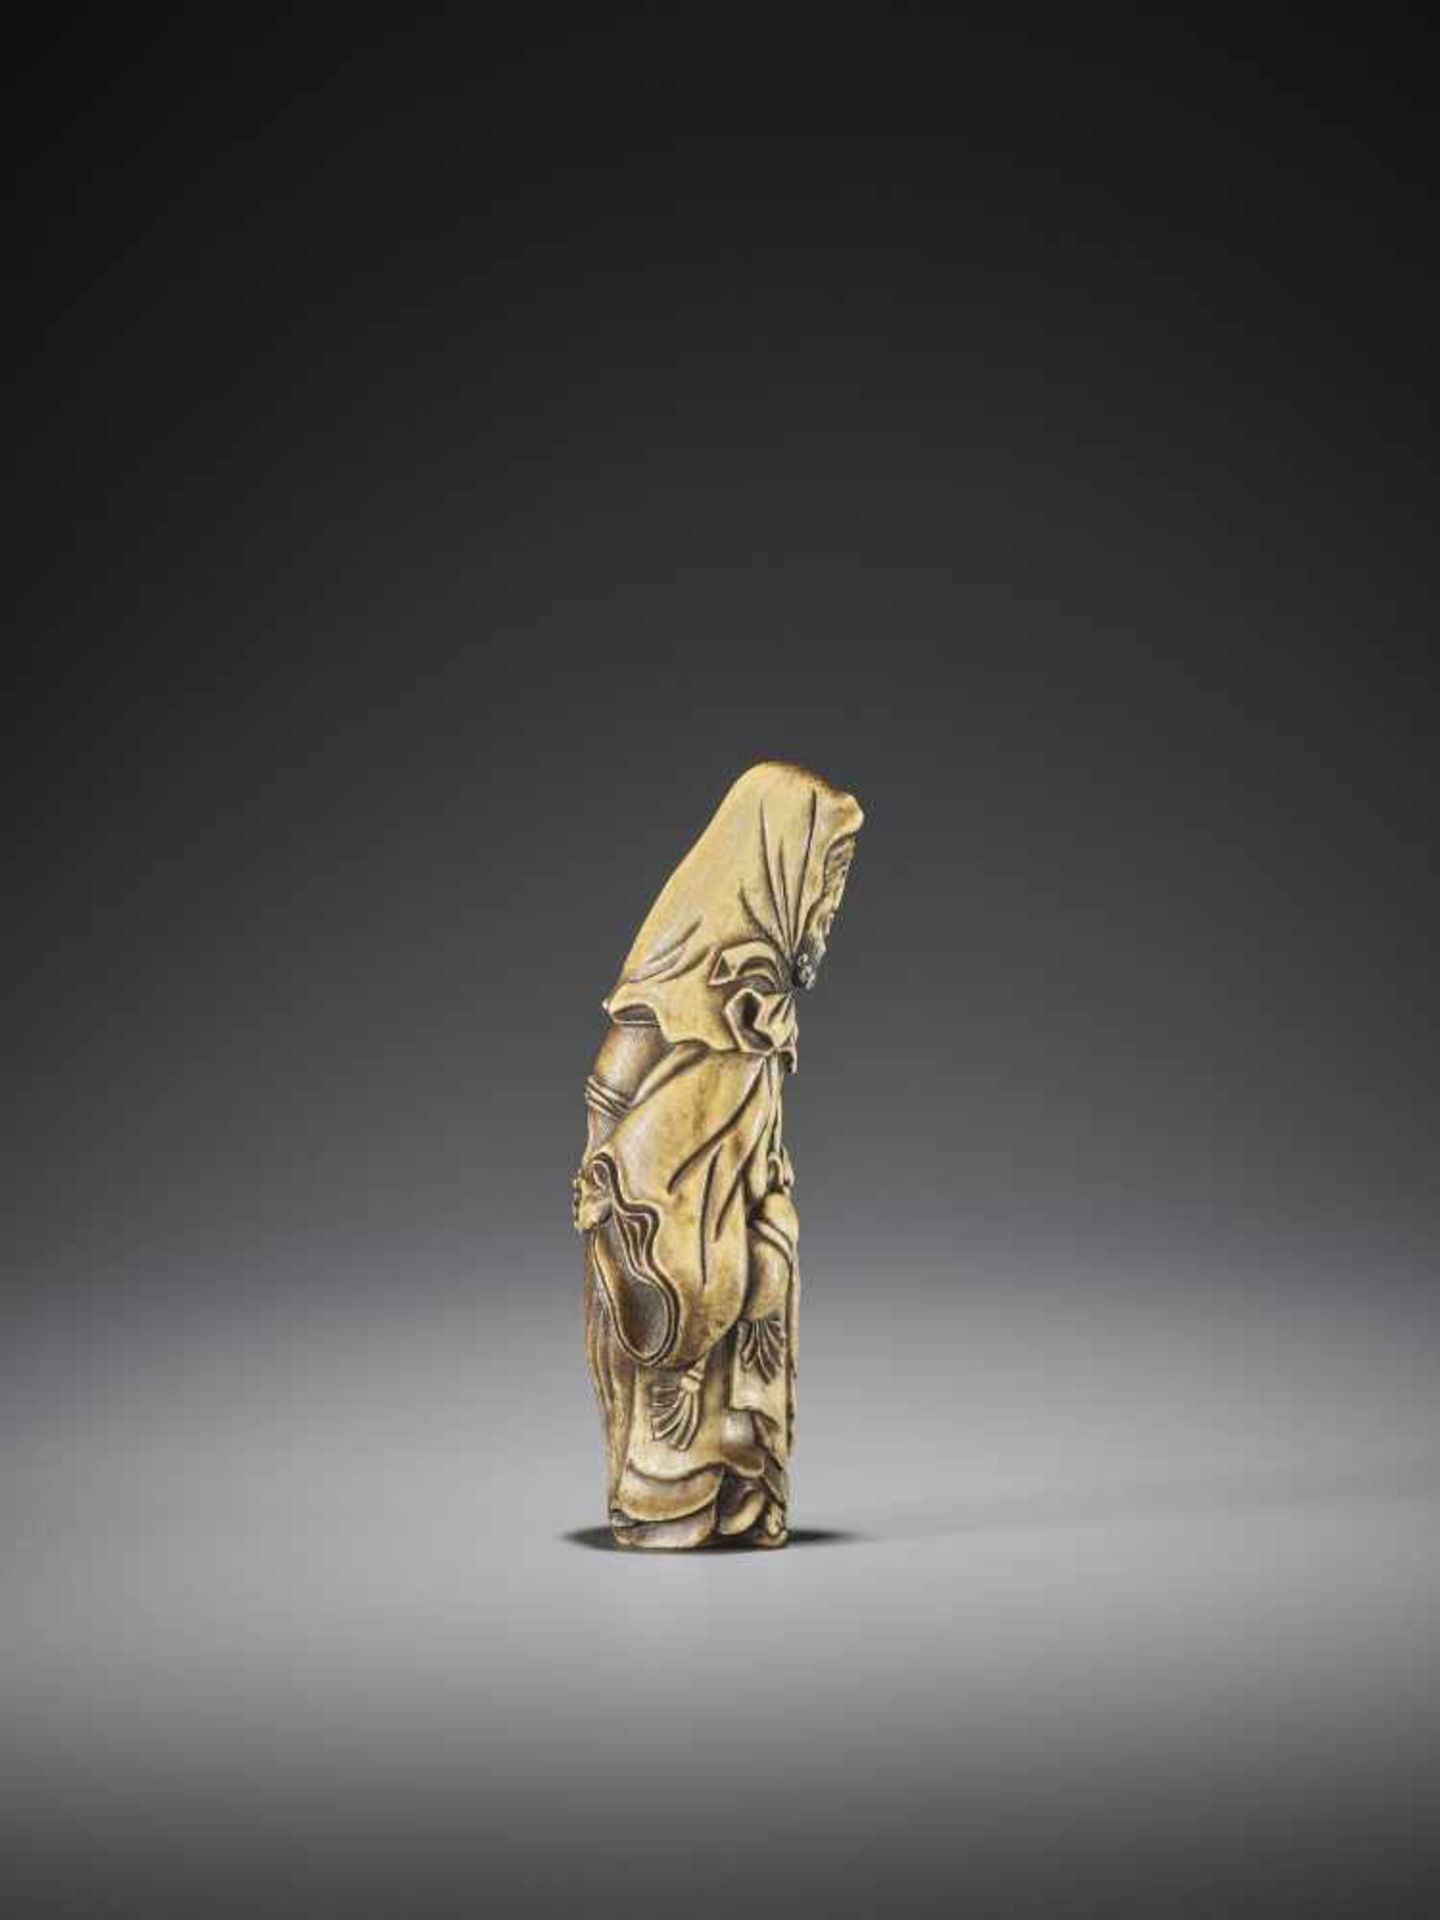 A SUPERB AND UNUSUAL STAG ANTLER NETSUKE OF A FOREIGNER - Image 7 of 10